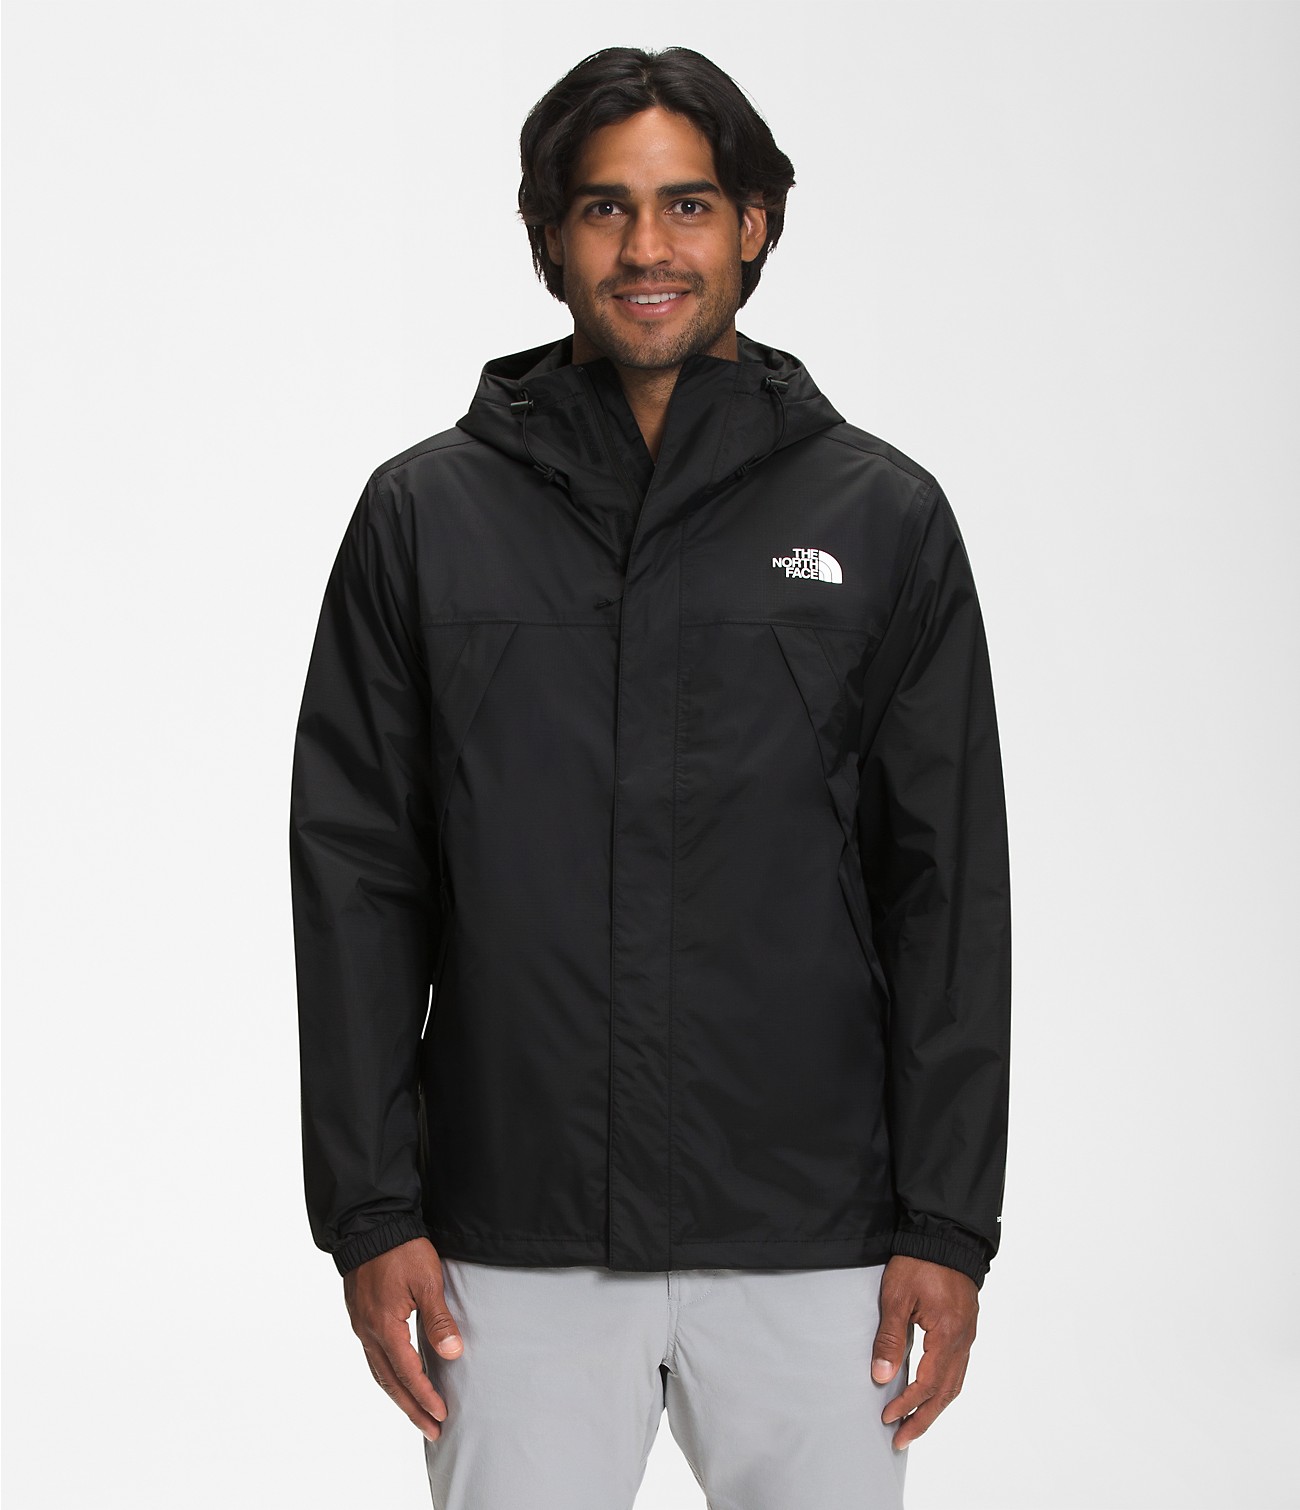 Unlock Wilderness' choice in the Eddie Bauer Vs North Face comparison, the Antora Jacket by The North Face